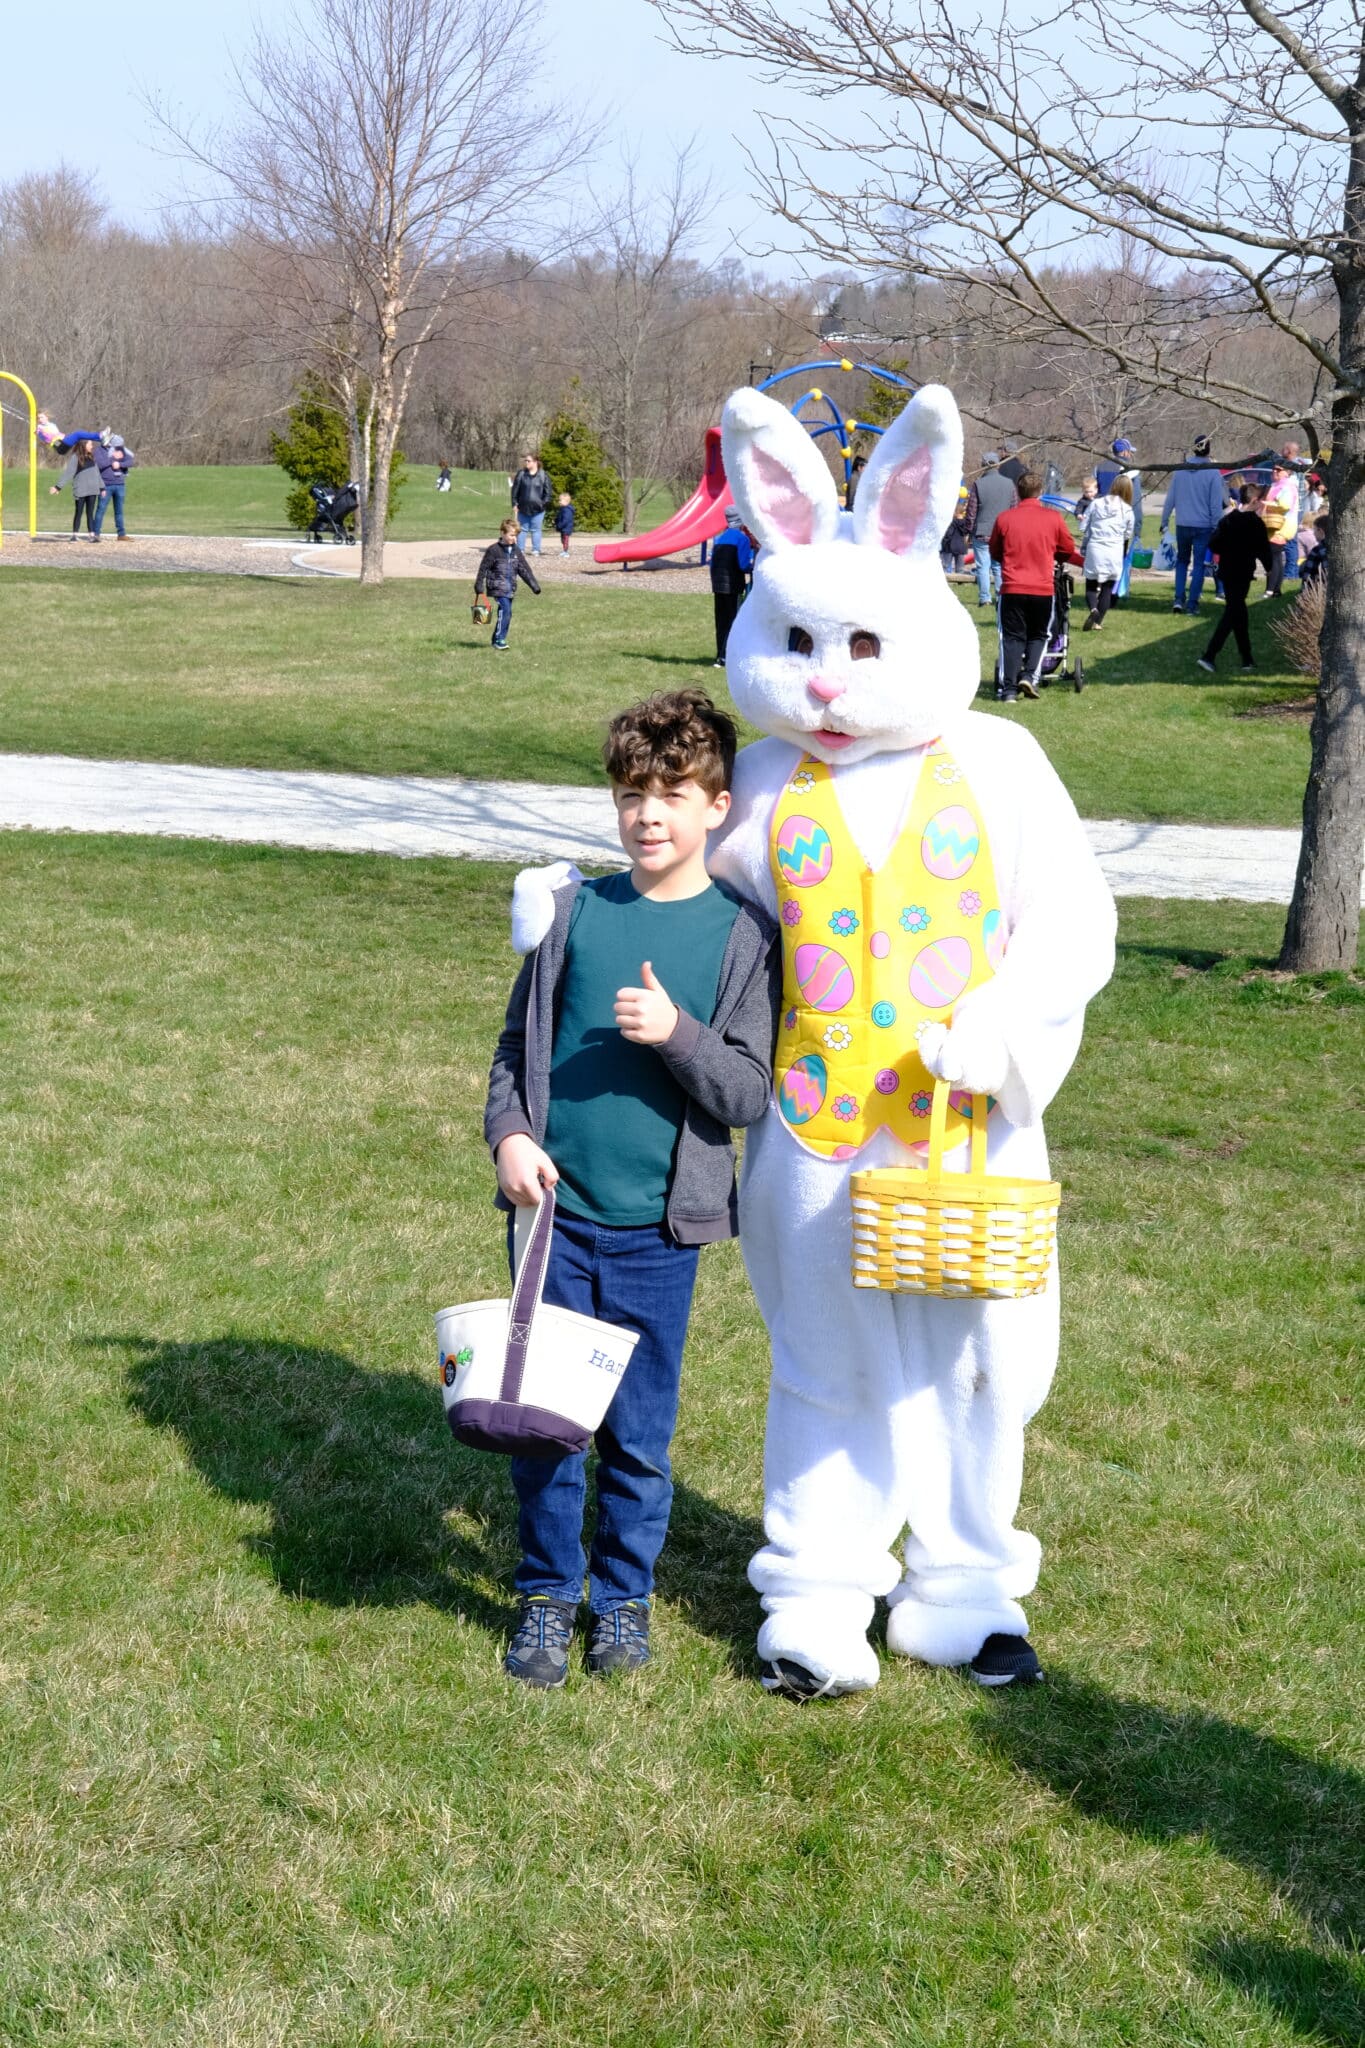 Photo with the Easter Bunny.